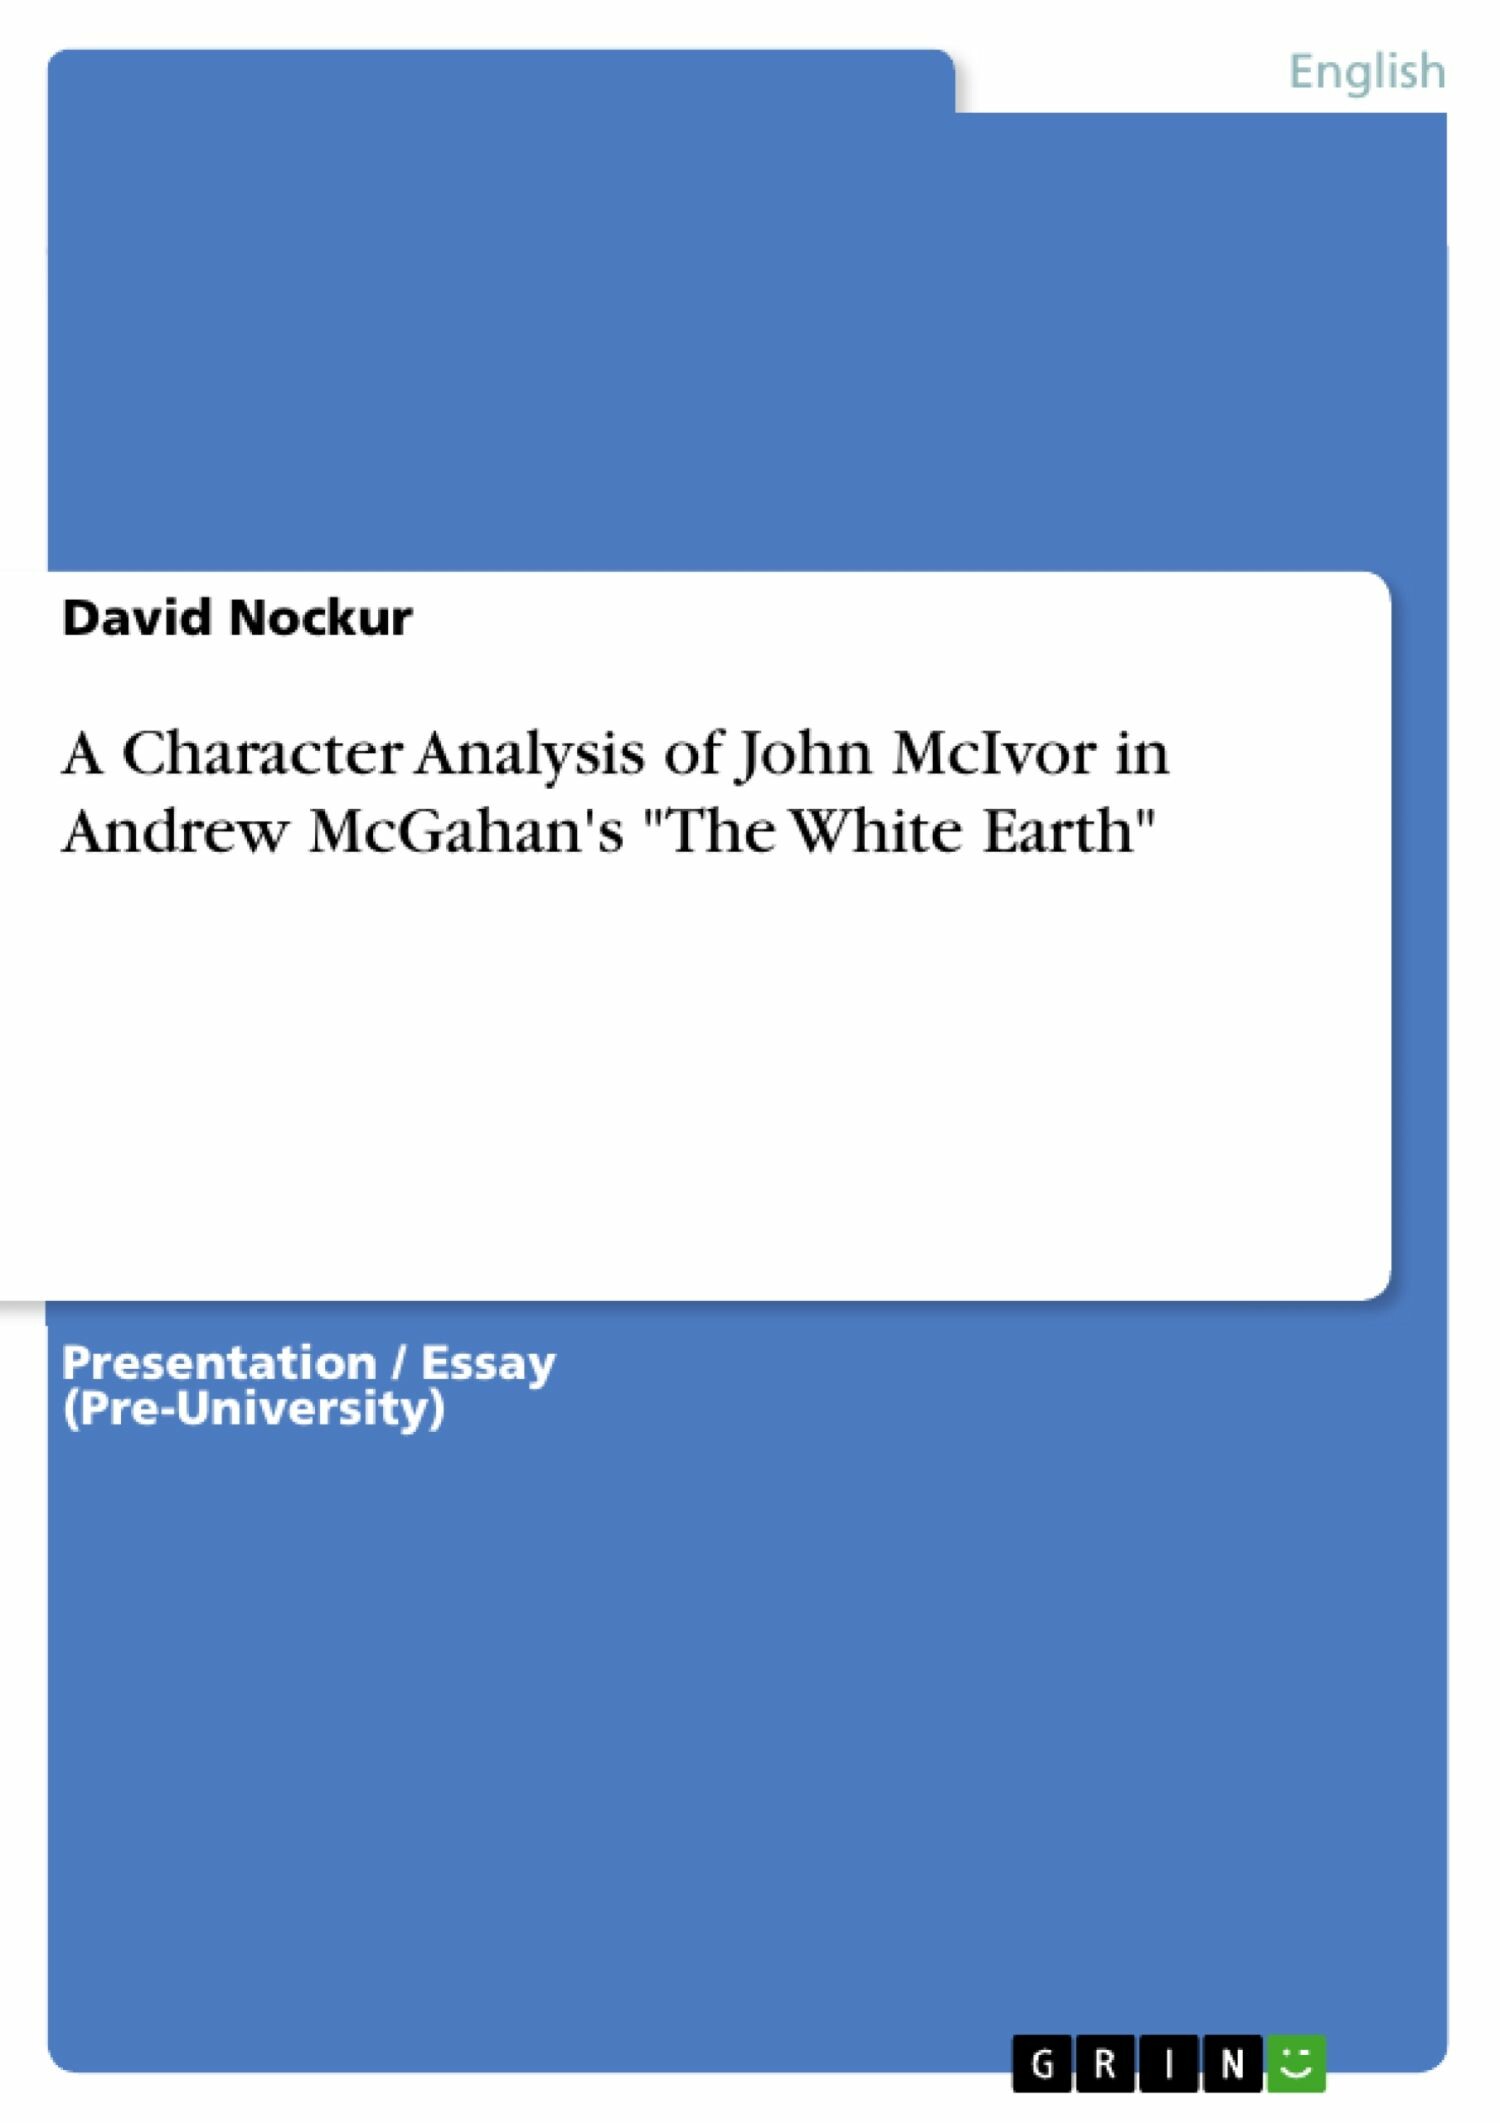 A Character Analysis of John McIvor in Andrew McGahan's 'The White Earth'